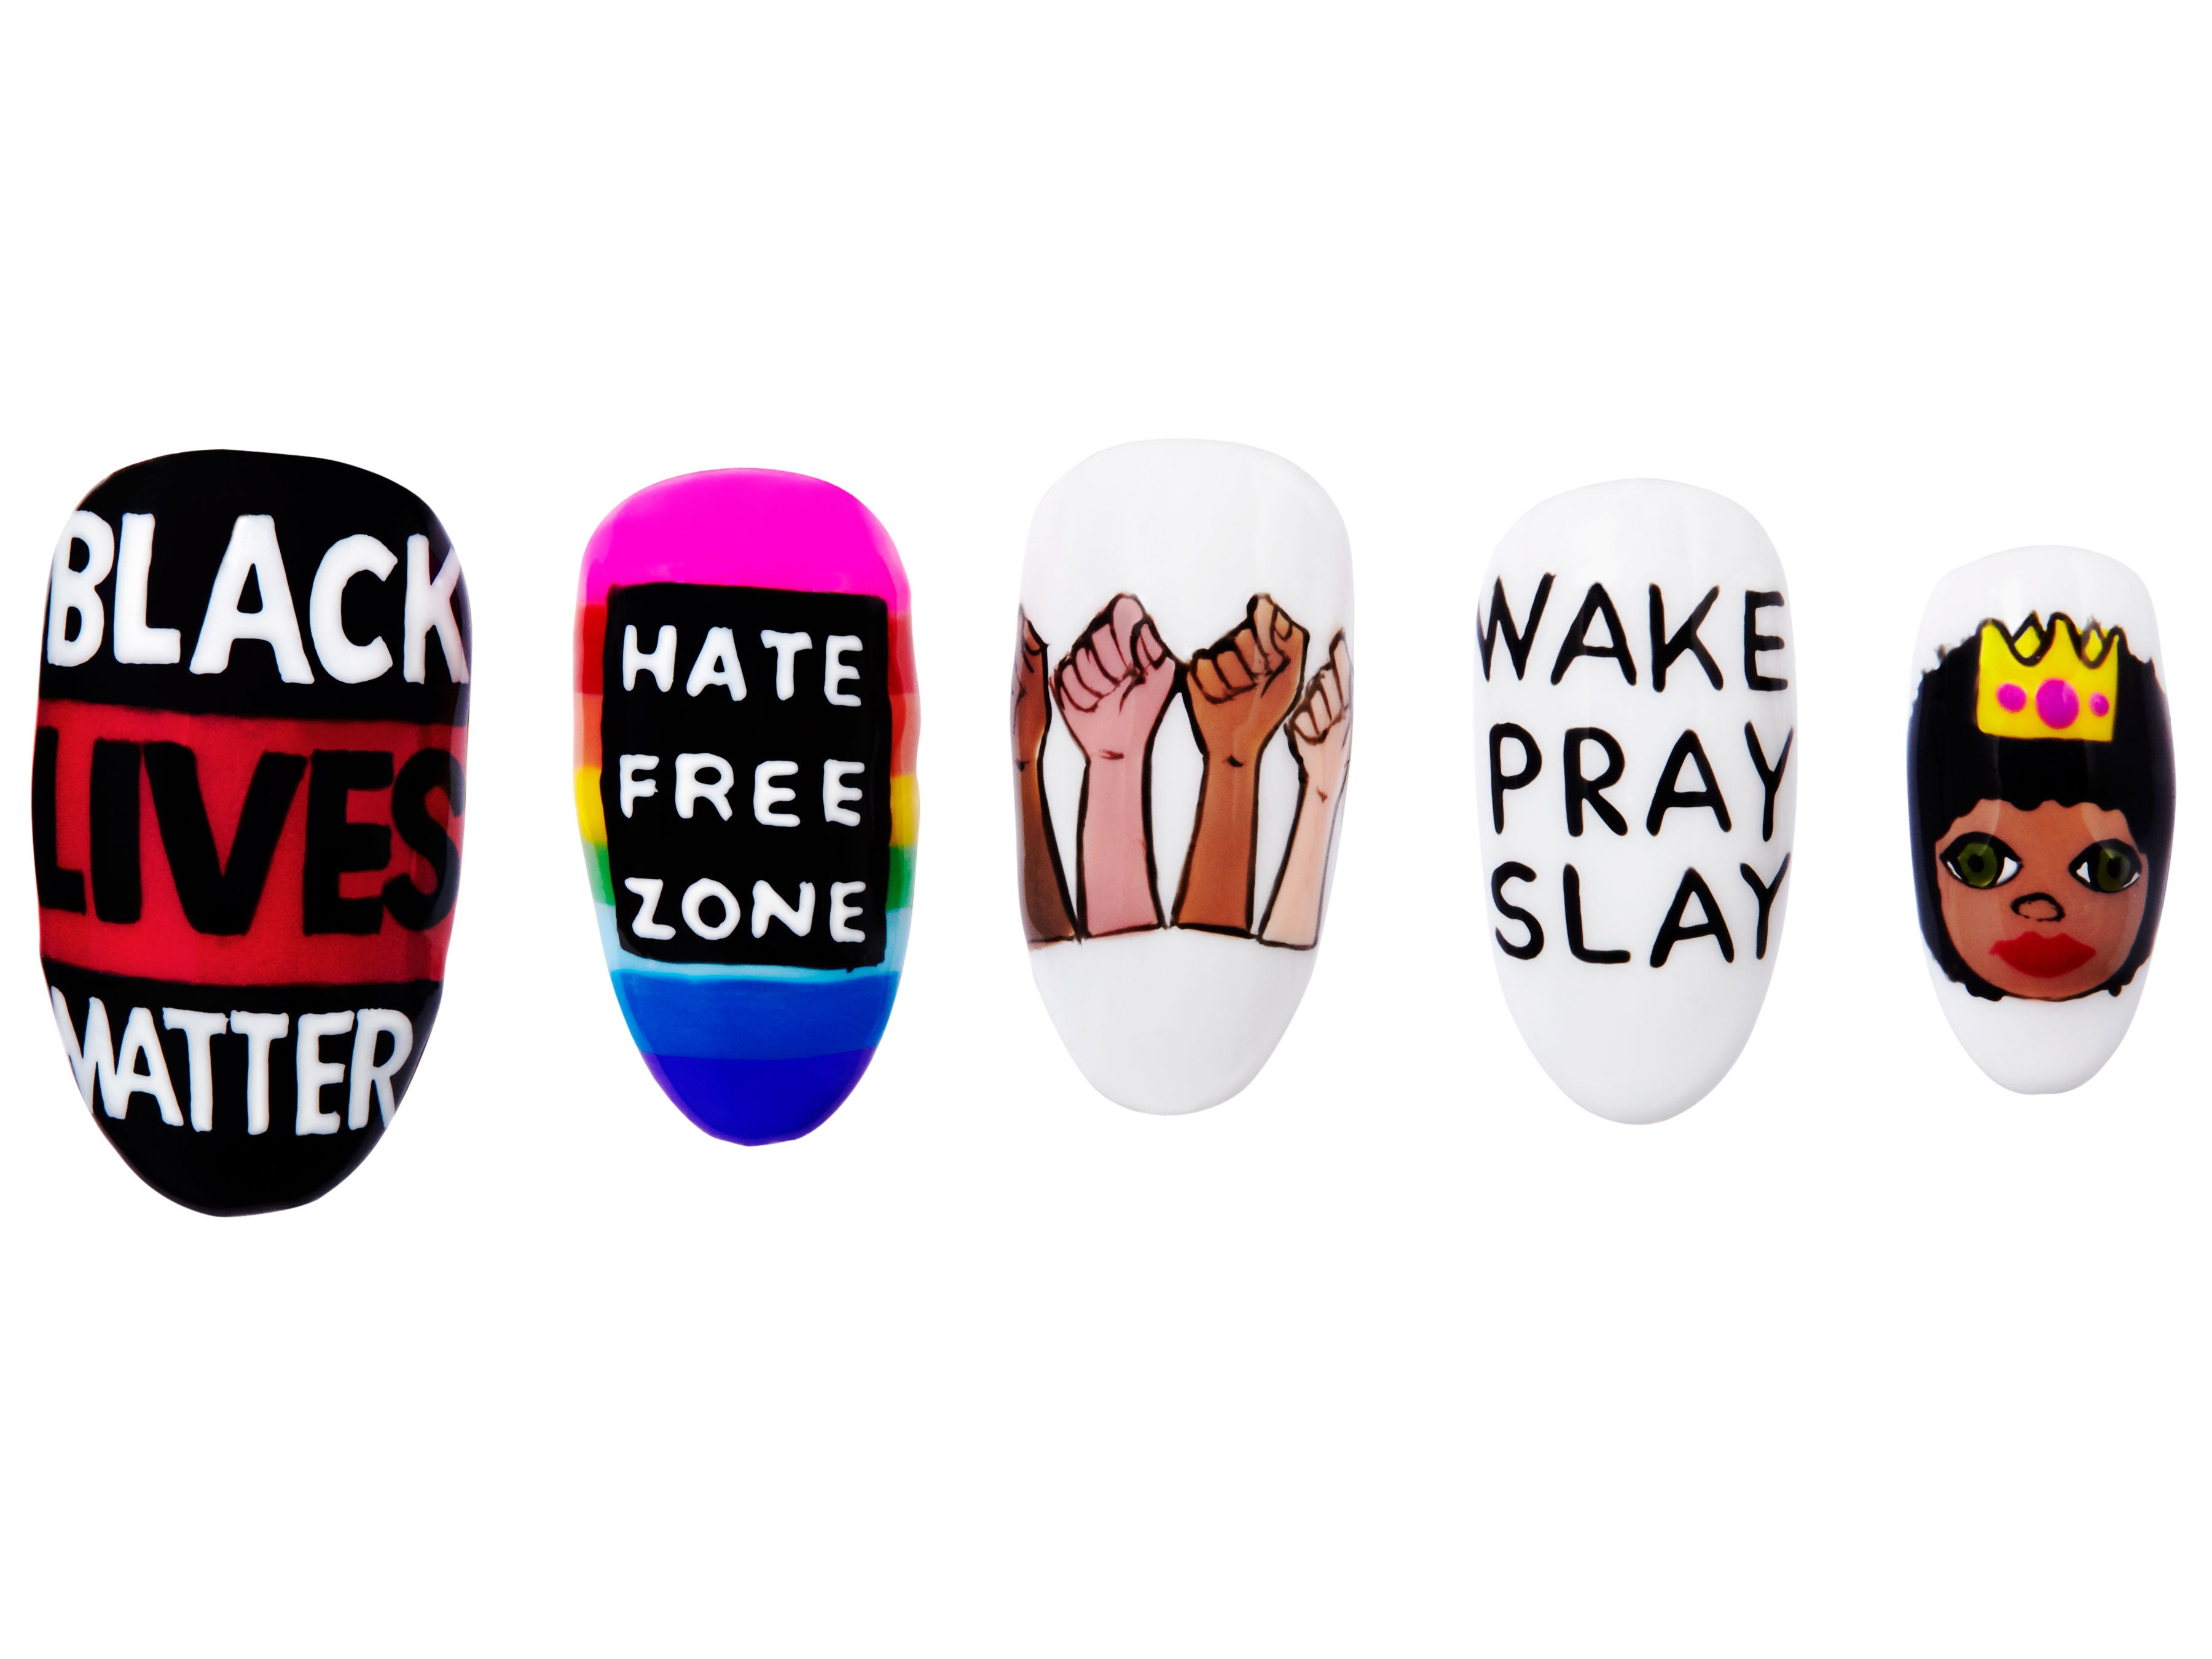 Three Nail Art Designs You Have To Try Right Now
